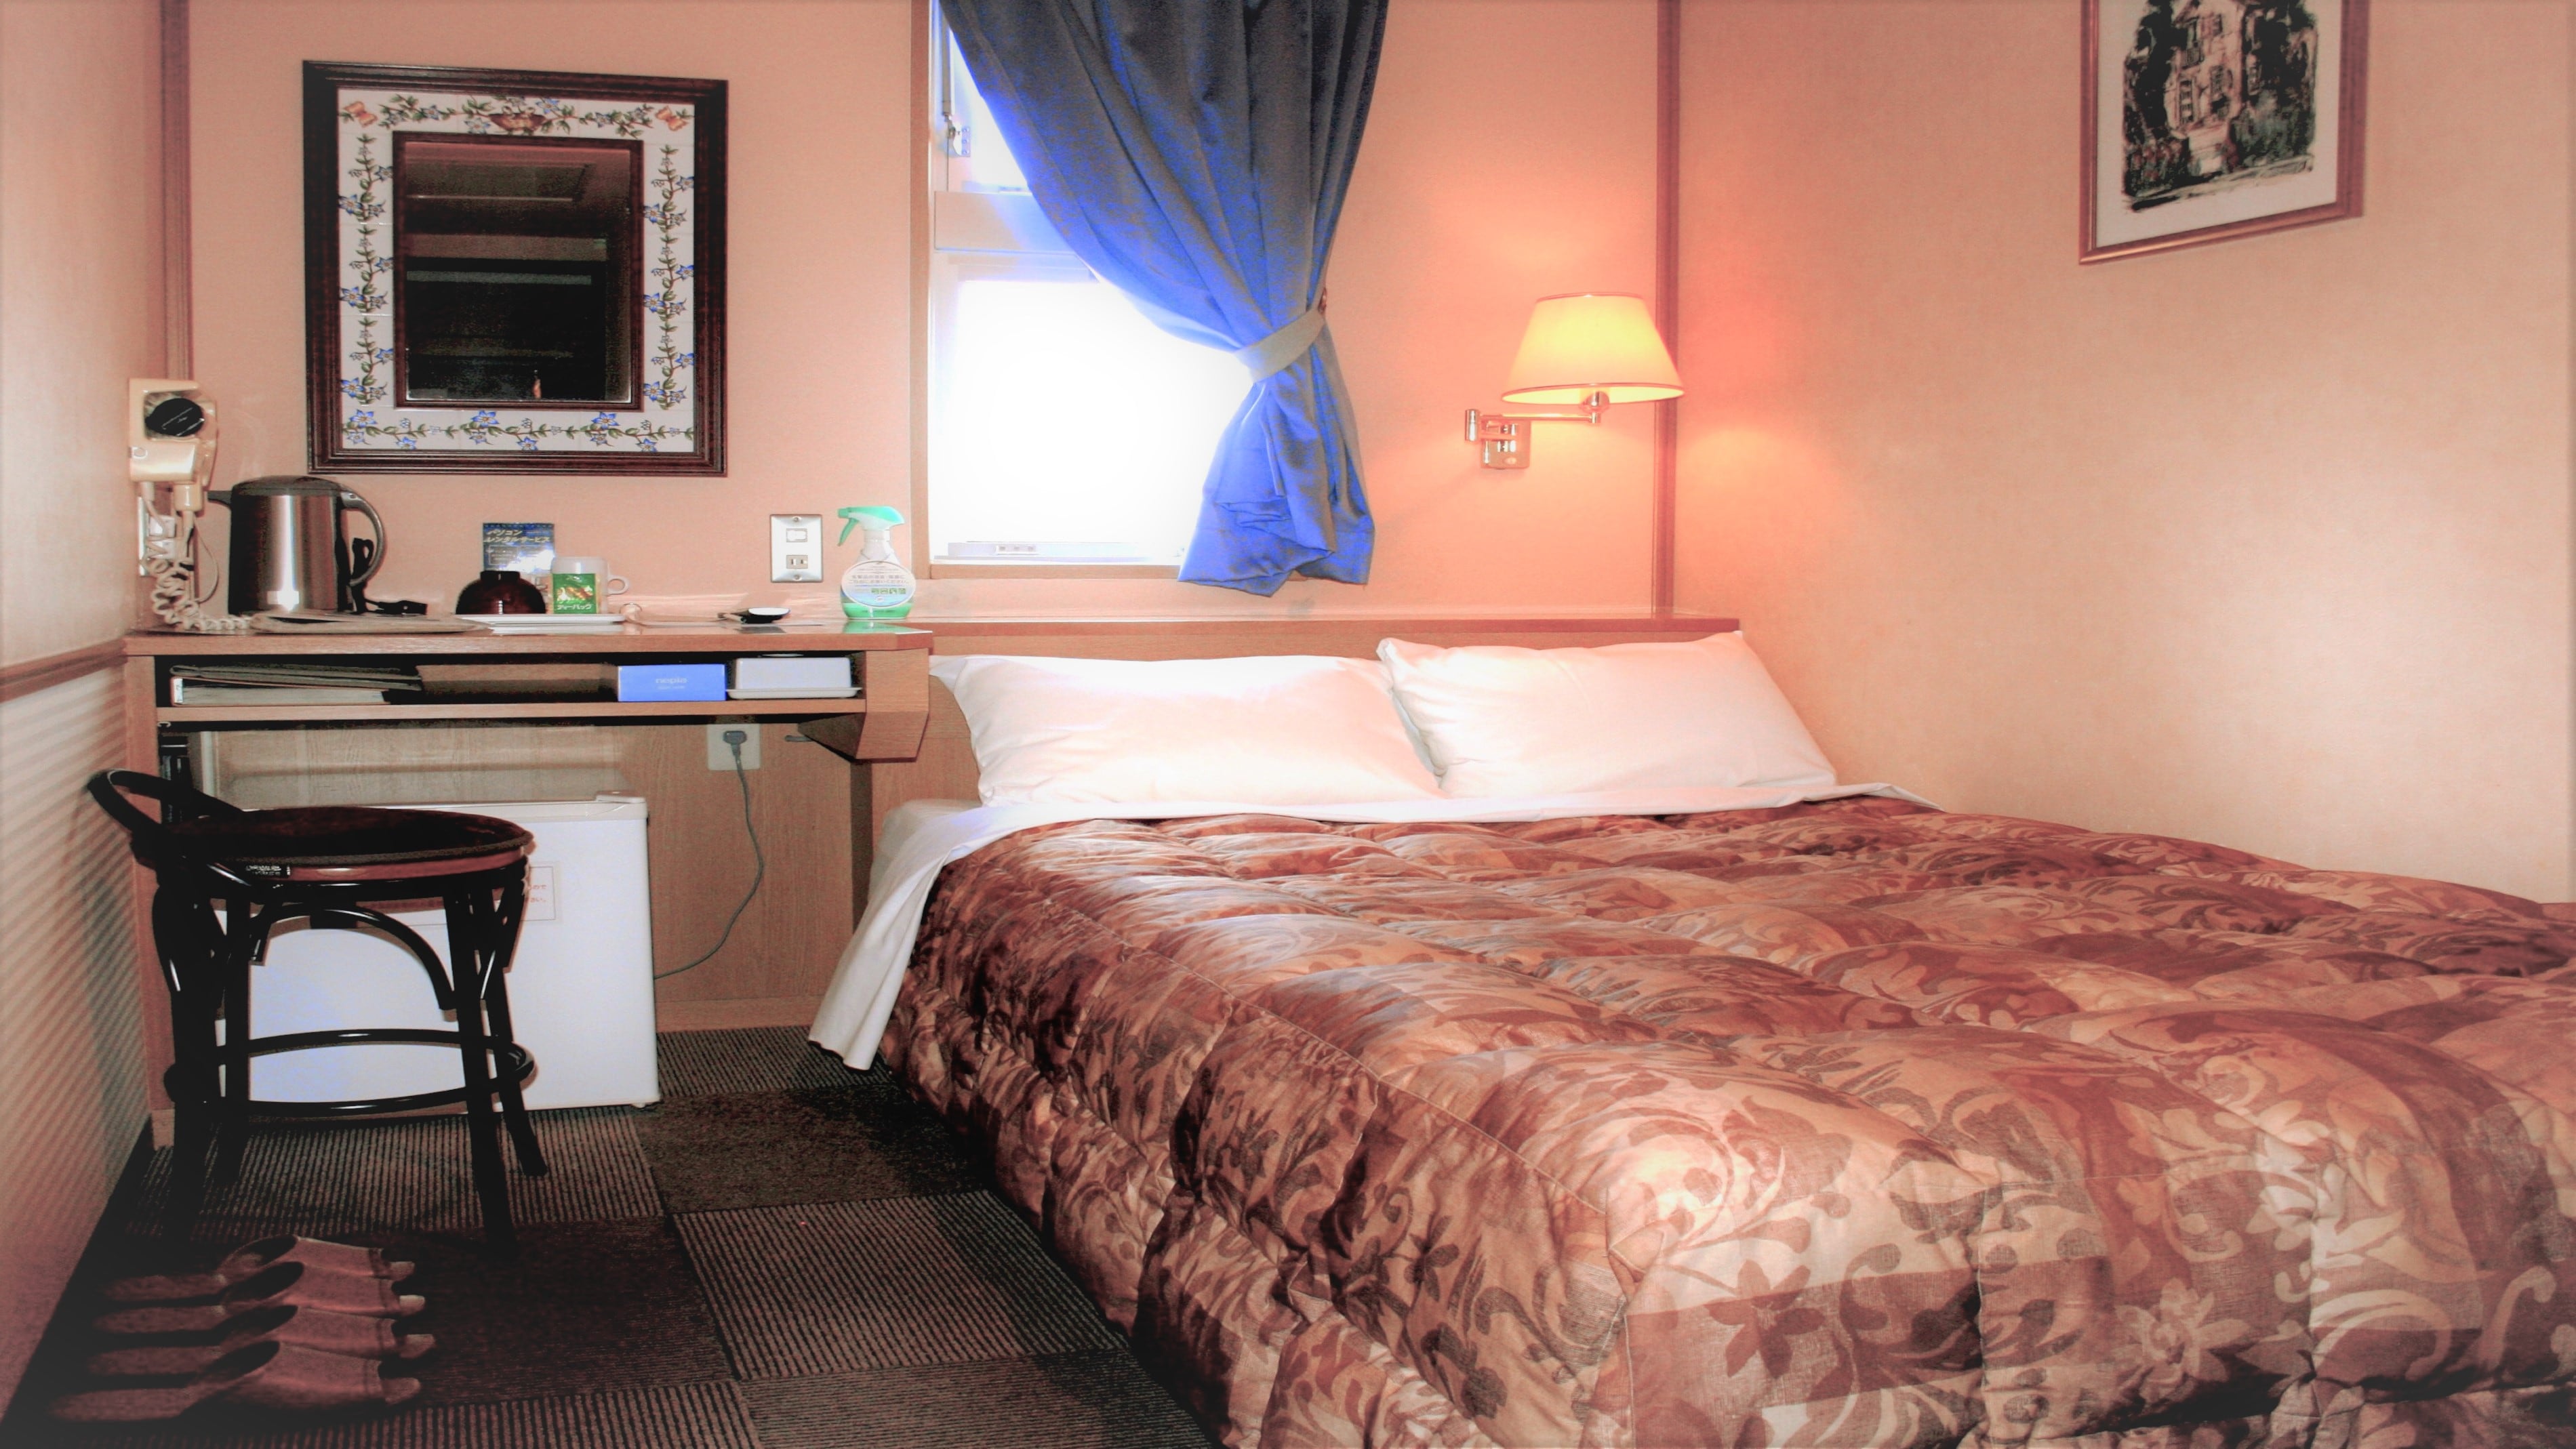 ■ All single rooms (semi-double beds) are equipped with spare bedding for 2 people as standard.